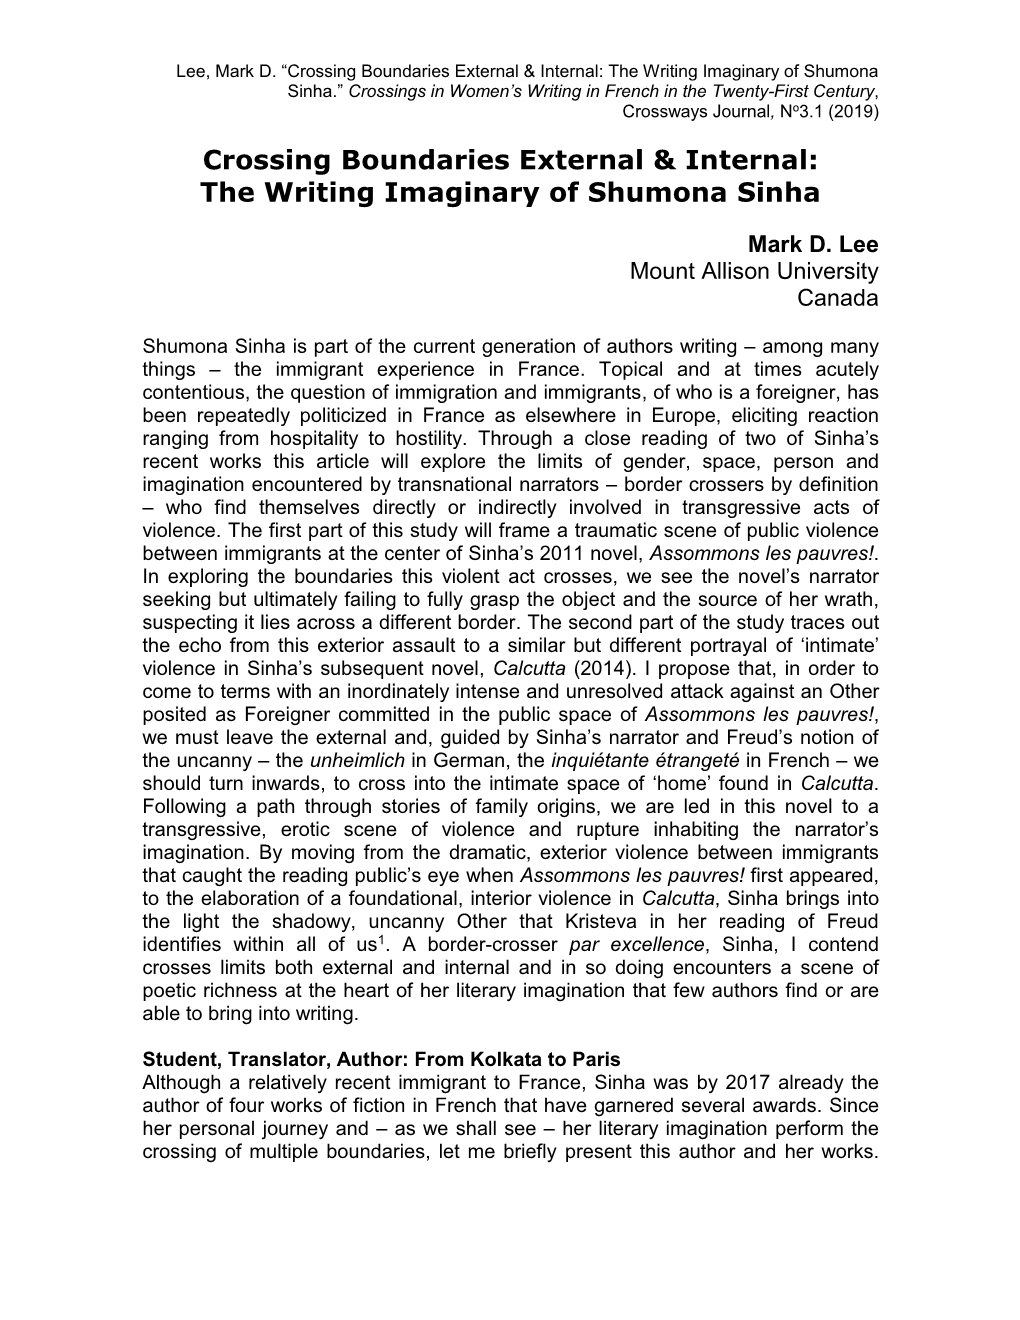 The Writing Imaginary of Shumona Sinha.” Crossings in Women’S Writing in French in the Twenty-First Century, Crossways Journal, No3.1 (2019)